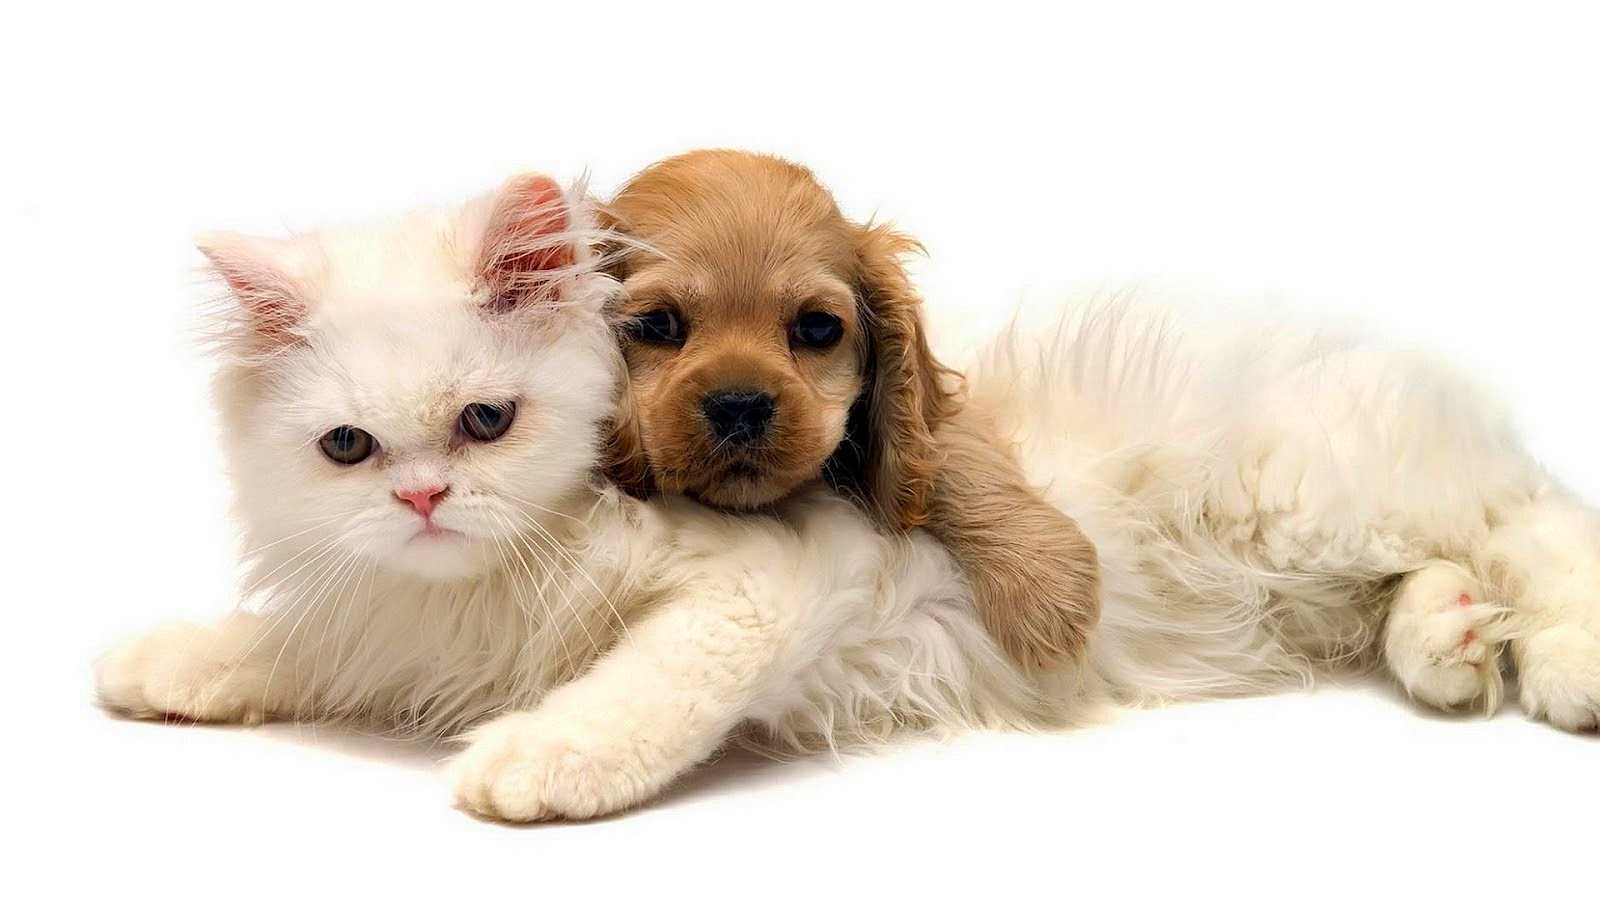 HD Animal Wallpaper Of A Cat And Dog Cuddling As Best